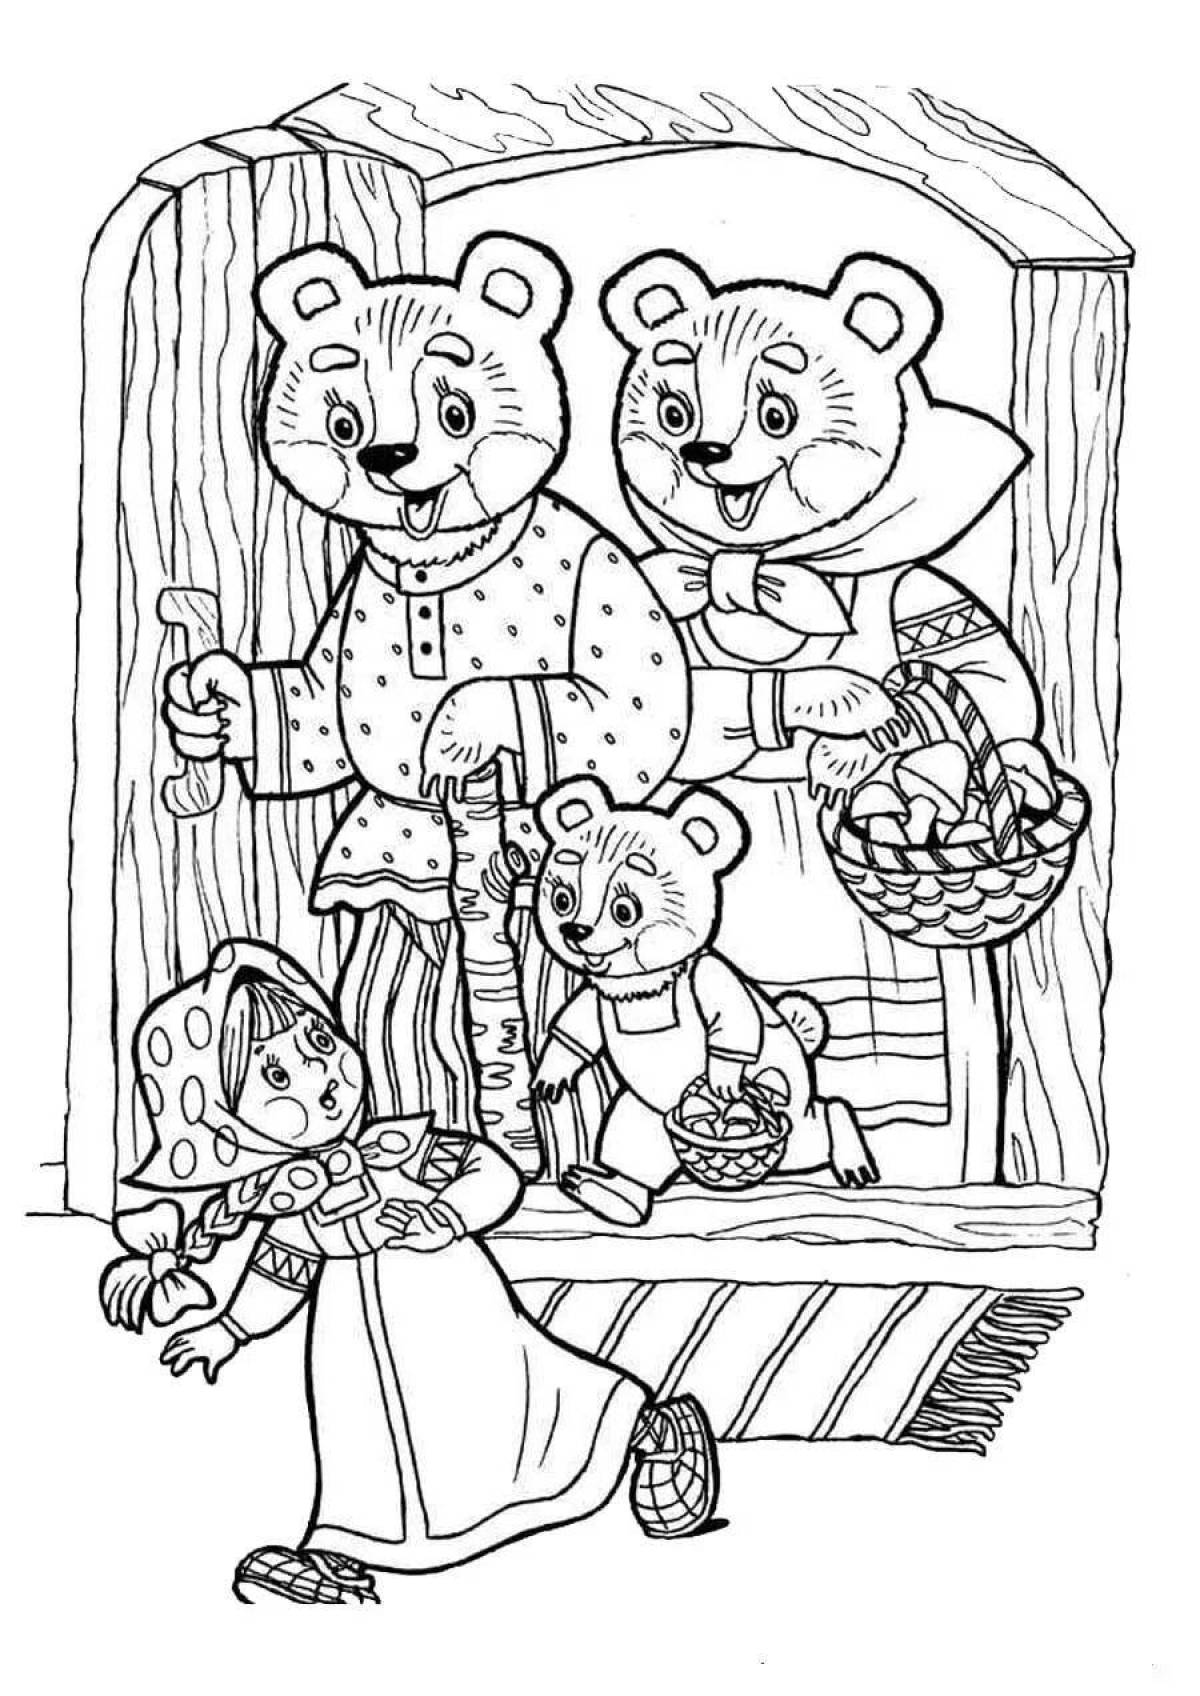 Coloring page serendipitous visiting a fairy tale